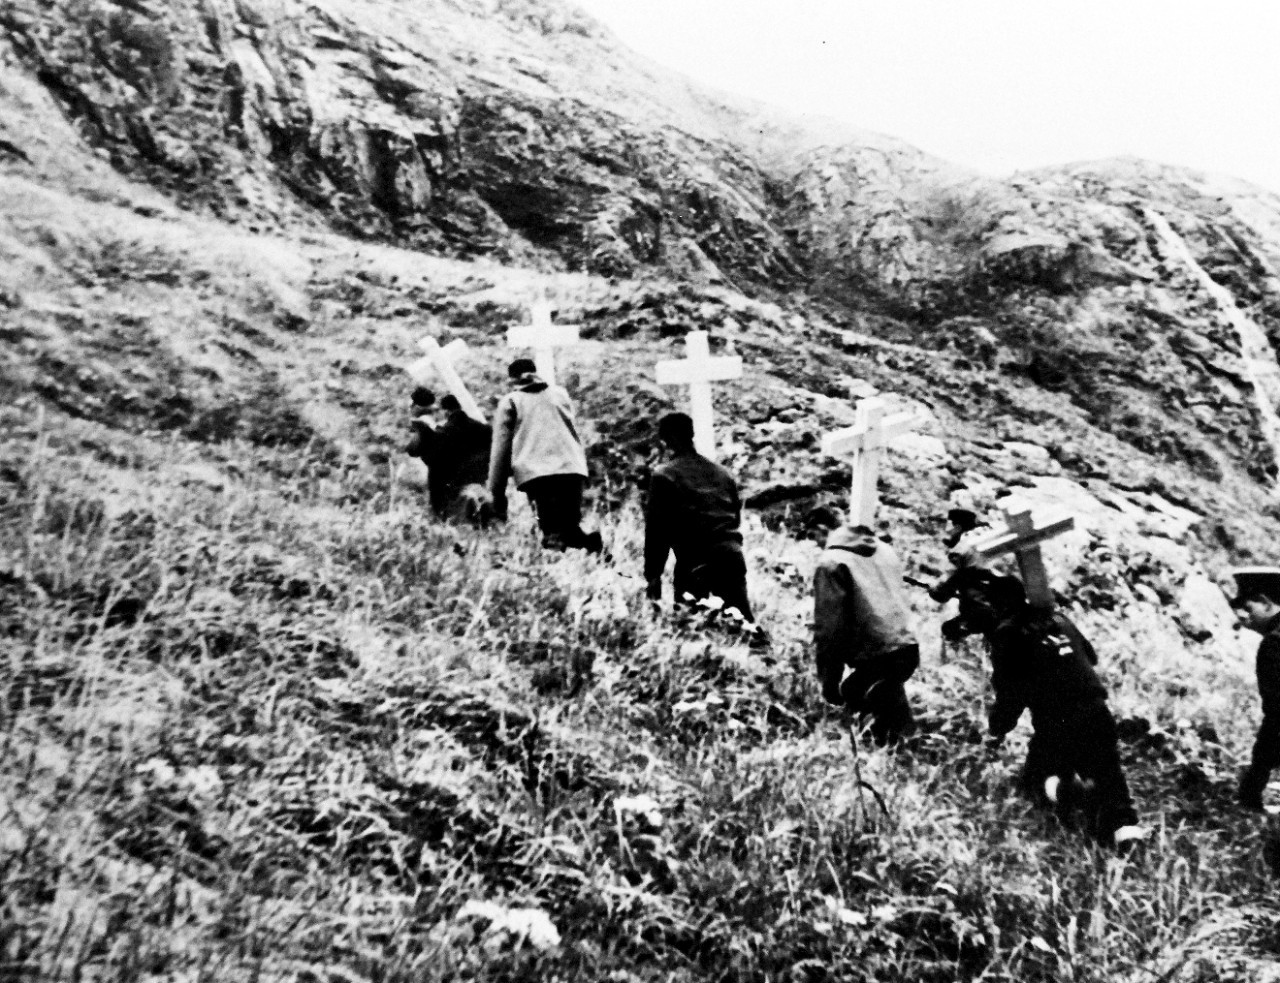 LC-Lot-803-15:  Aleutian Islands Campaign, June 1942 - August 1943.  Battle of Attu, May 11-29, 1943.  Grim anywhere, war has an added starkness in the bleak wilds of the Aleutians.  Upon the living falls not only the sorrowful burden of mourning the dead, but the harrowing task of burying them.   Bearing crosses and shovels, Navy men tail up the barren sides of a mountain to perform the last rites for their comrades.  U.S. Navy photograph, released September 7, 1943.  Photographed through Mylar sleeve. Courtesy of the Library of Congress.    (2015/11/06).